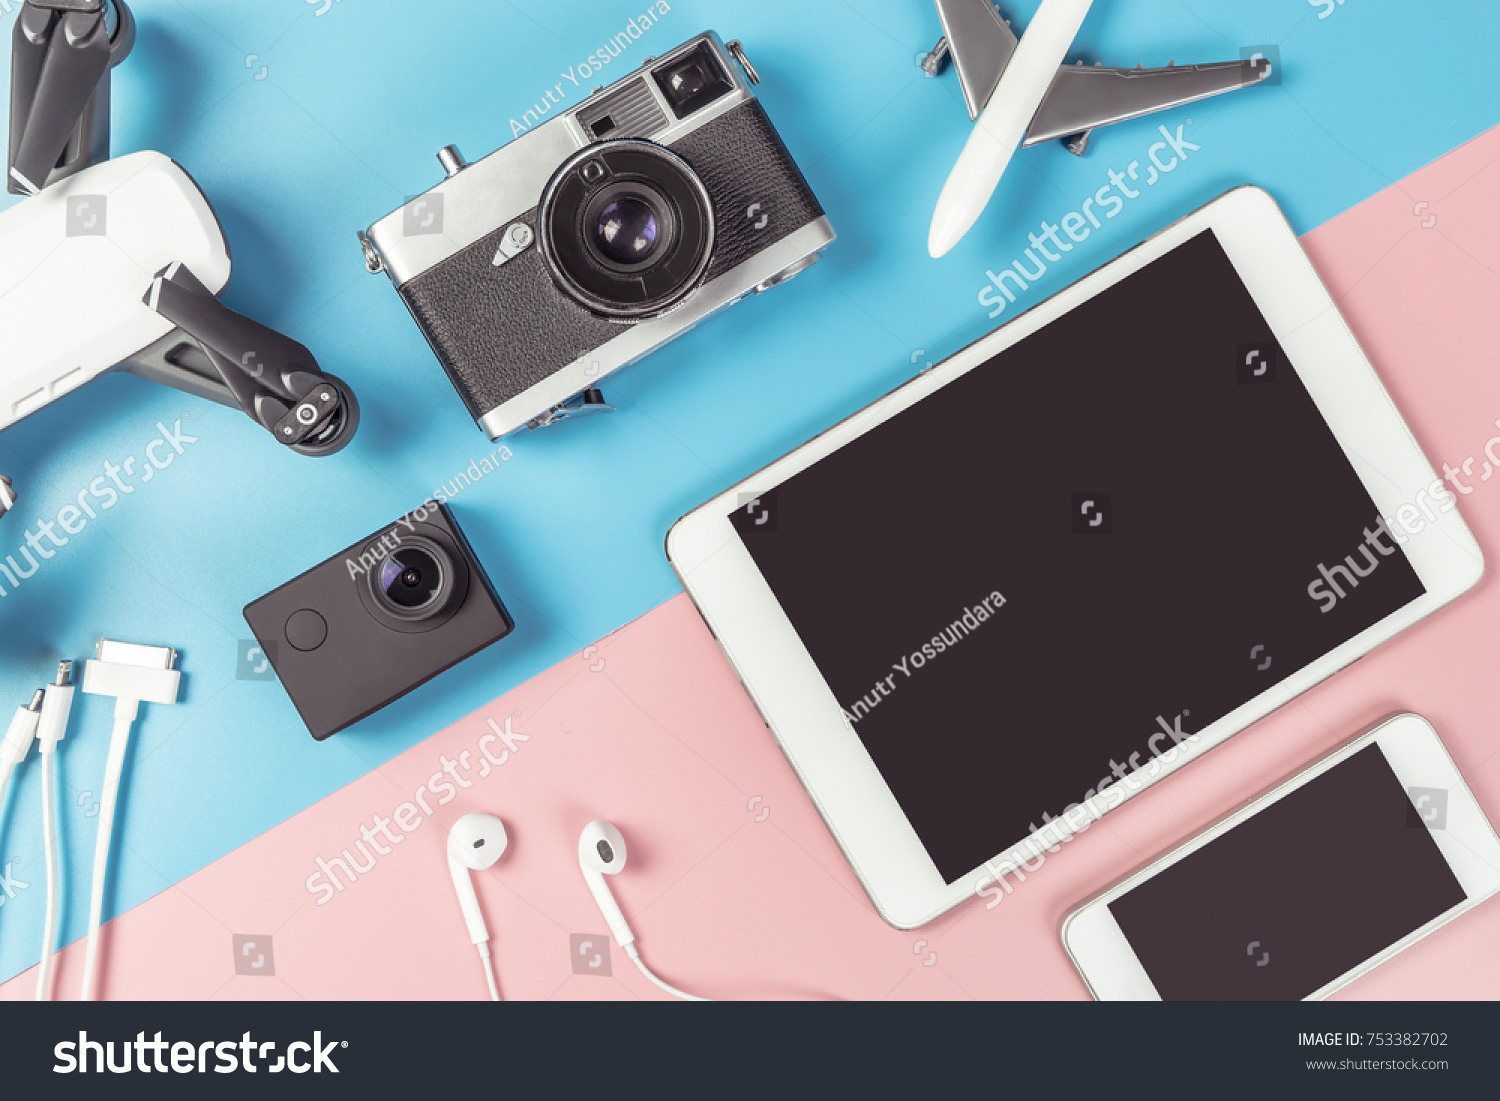 Travel Photographer gadgets and accessories object flat lay Top view on blue and pink background for travel concept with Blank Tablet and Mobile phone screen for Application mock up  #753382702